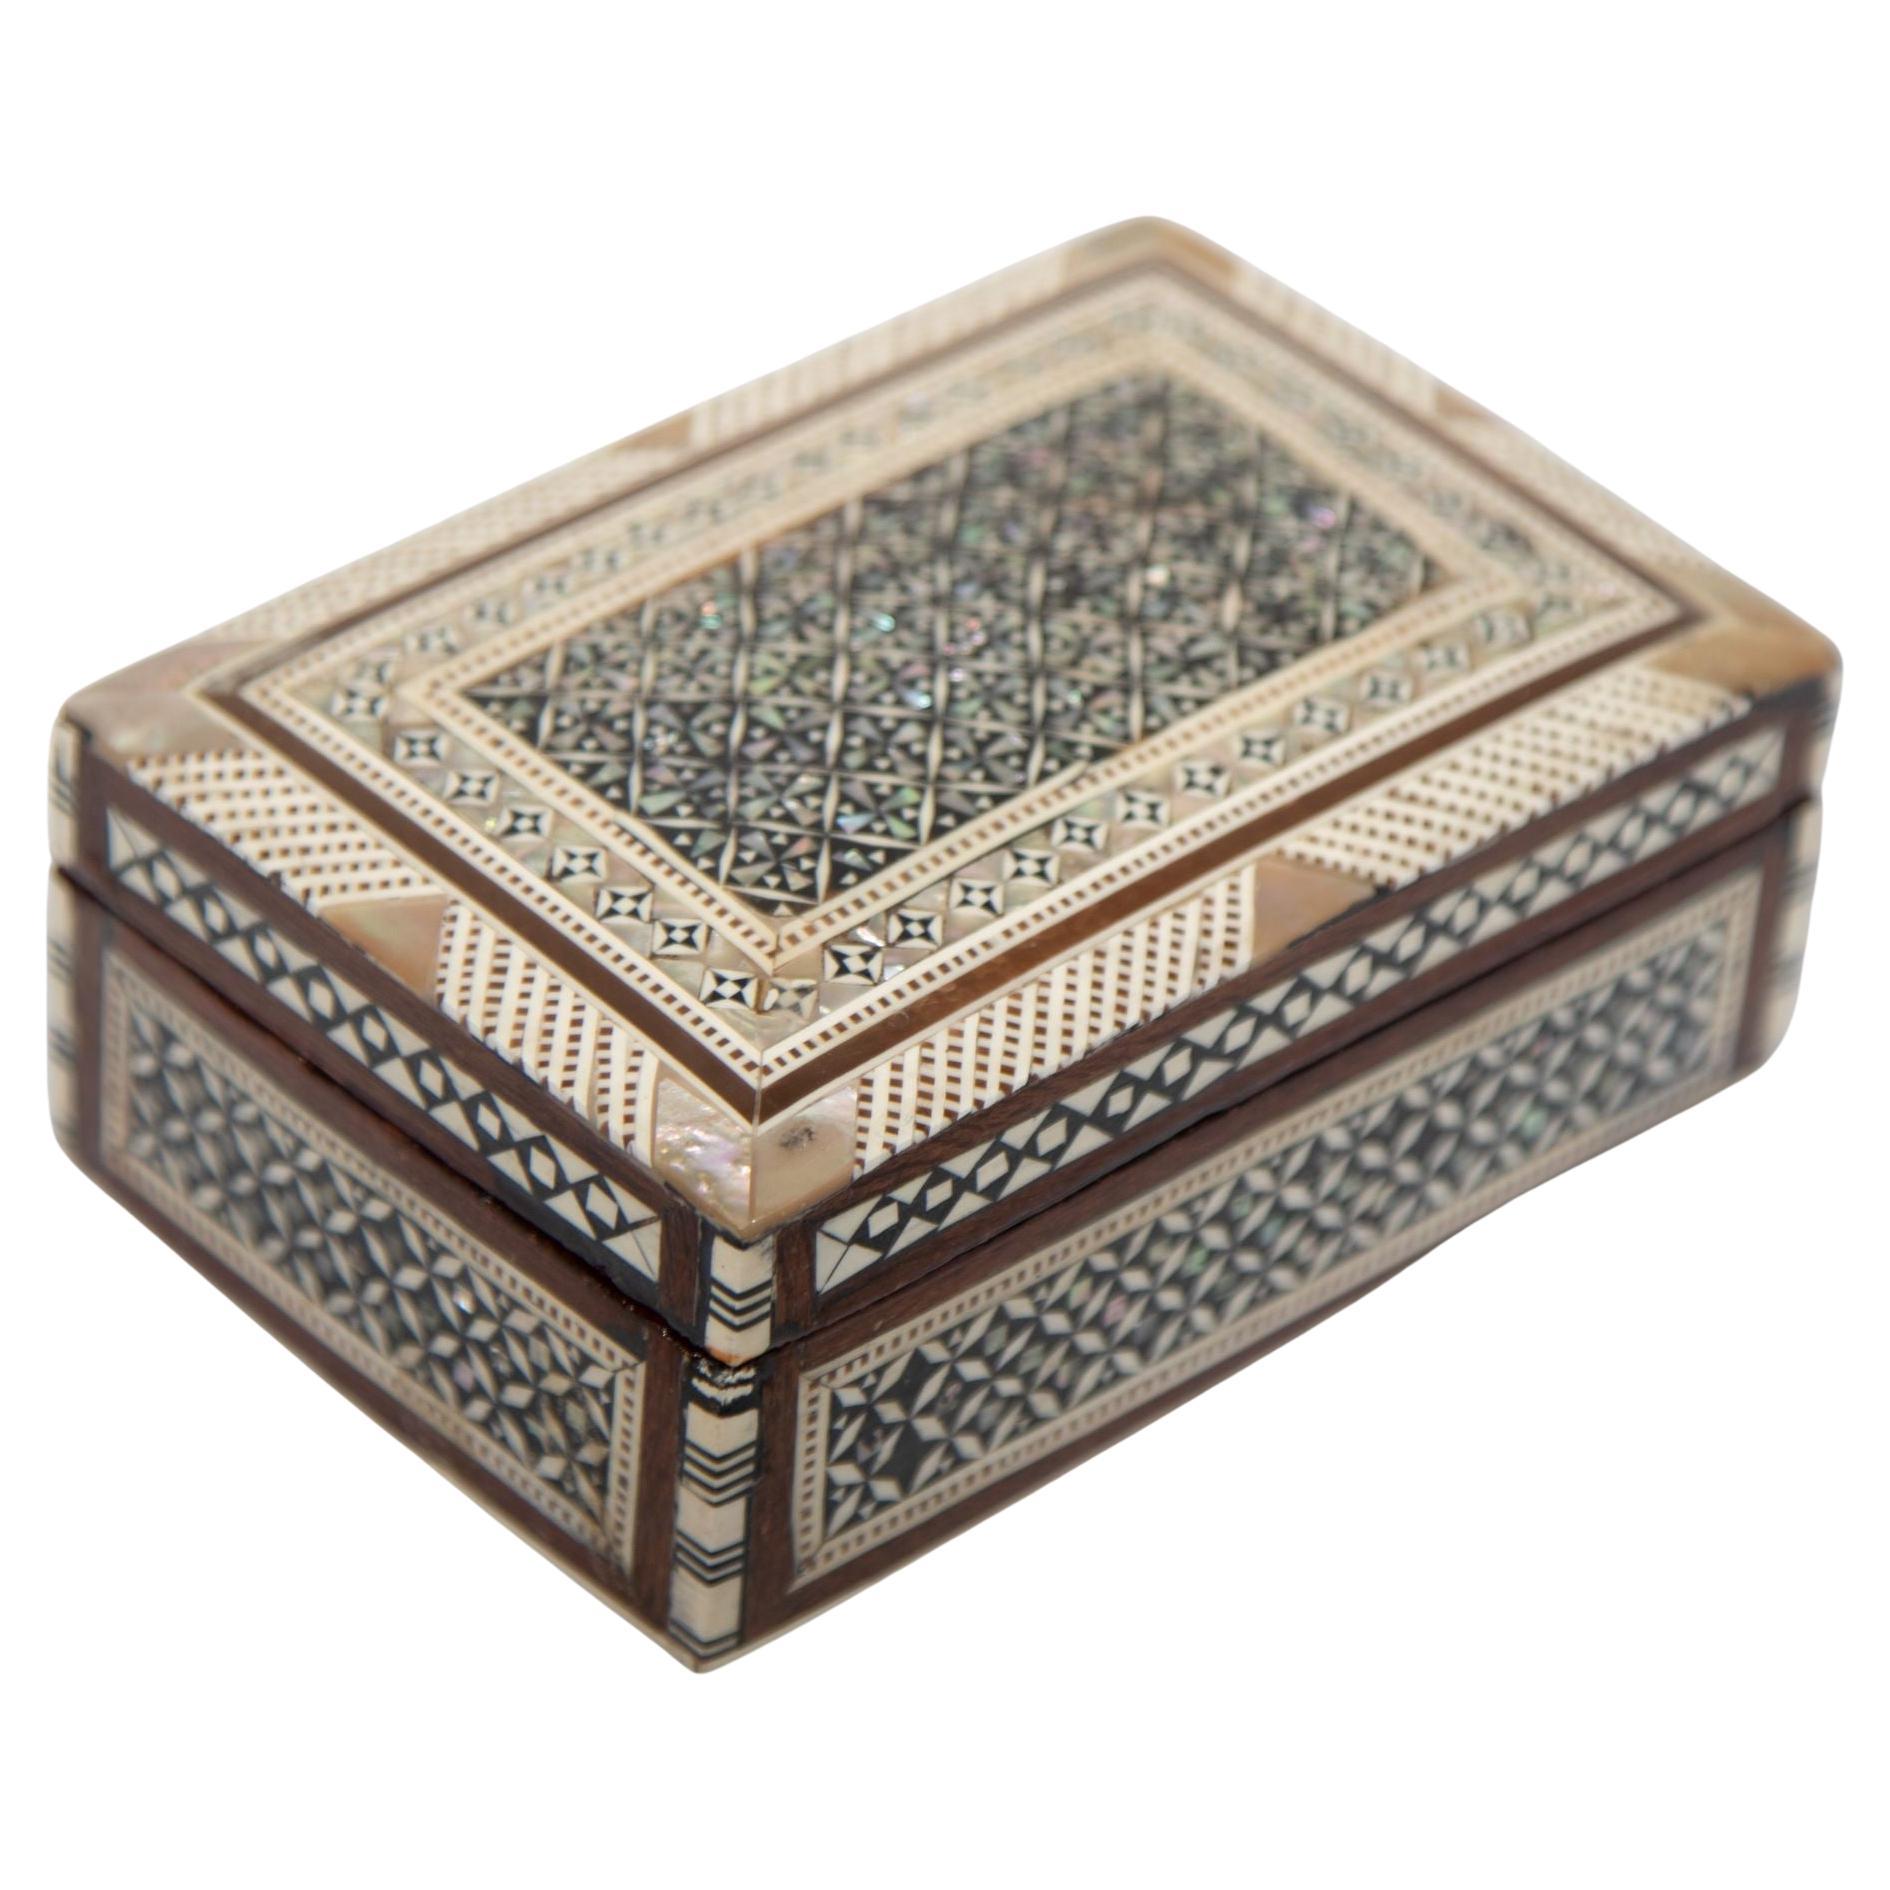 Middle Eastern Mosaic Wood Box with Inlays of Mother of Pearl, C. 1950s